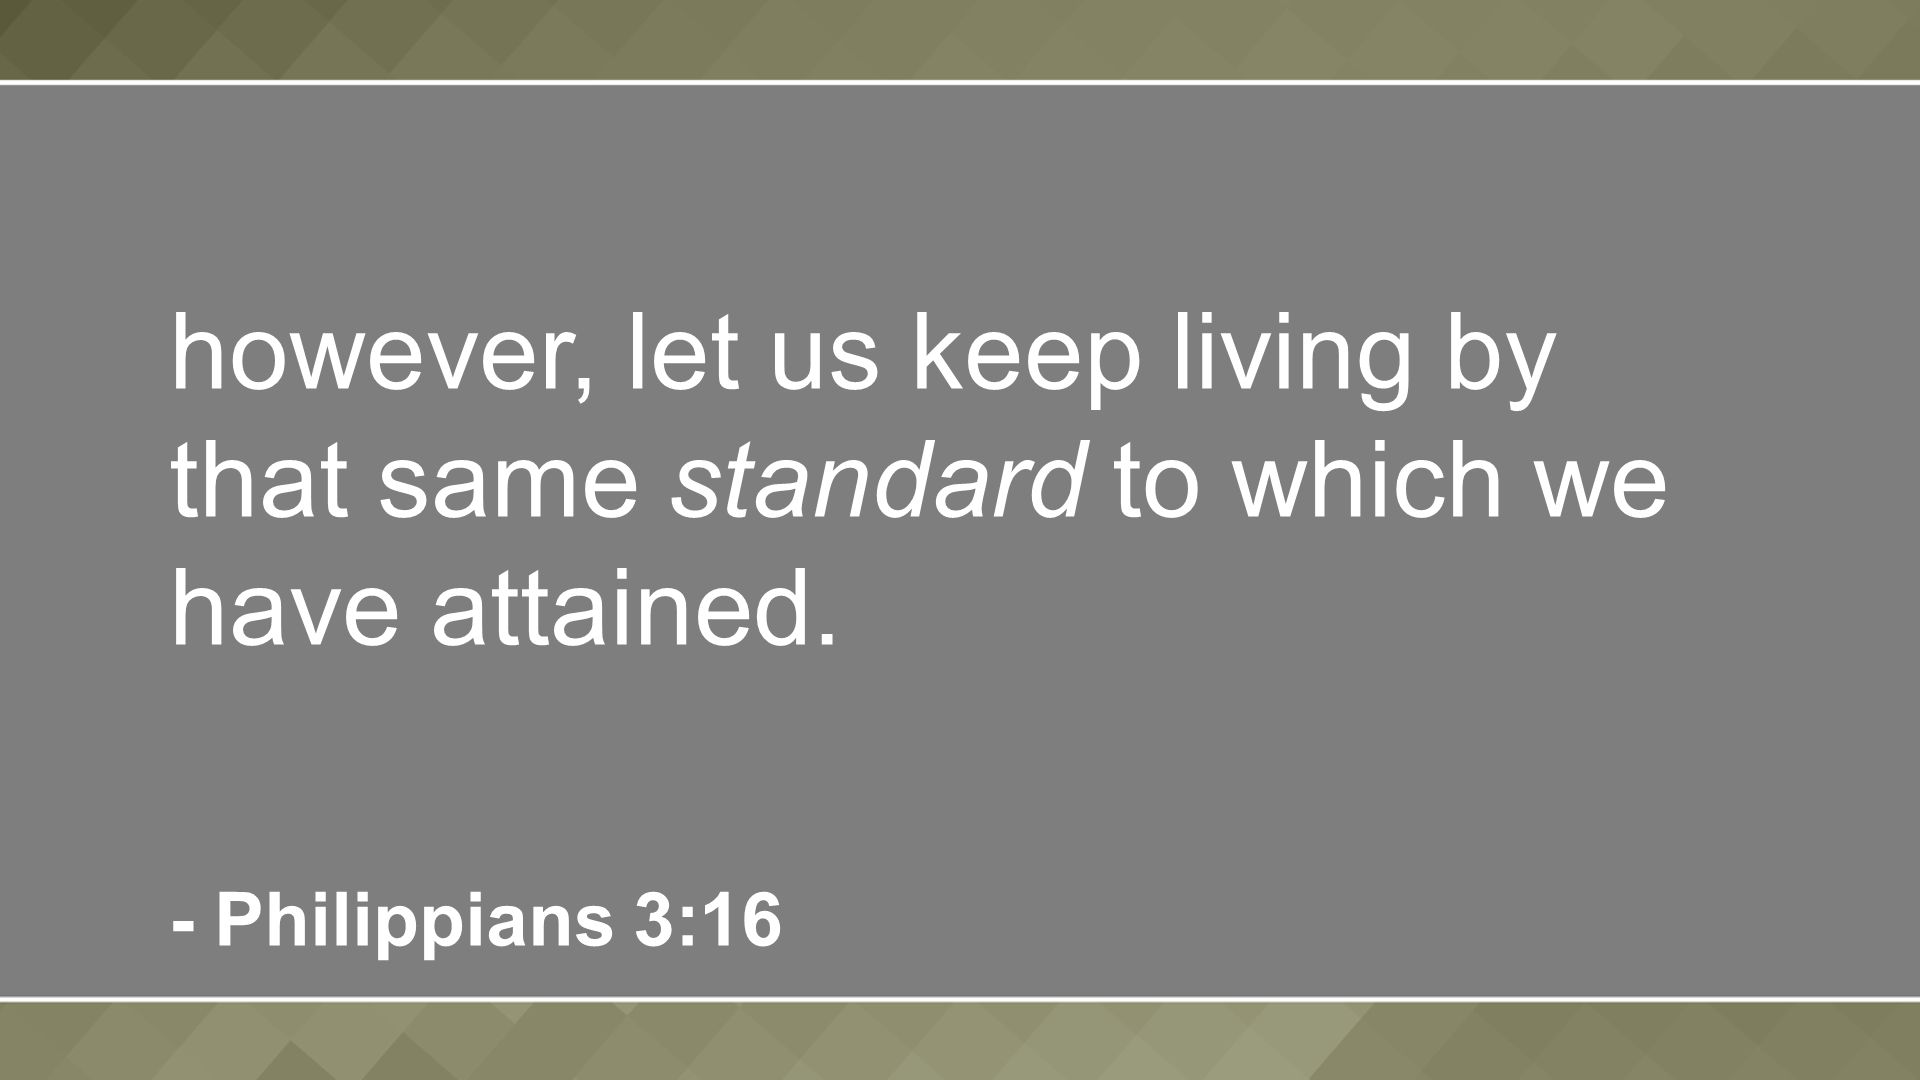 however, let us keep living by that same standard to which we have attained. - Philippians 3:16